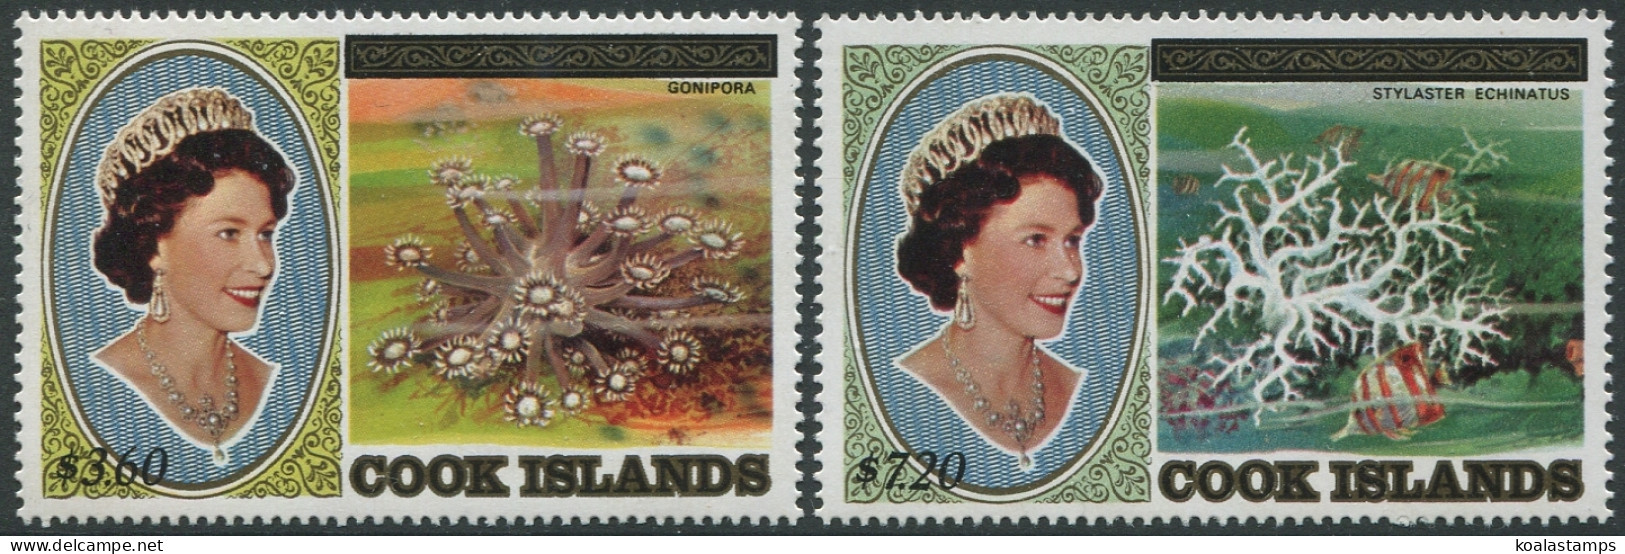 Cook Islands 1984 SG990-992 Corals High Values Ovpts (2) MNH - Cookinseln